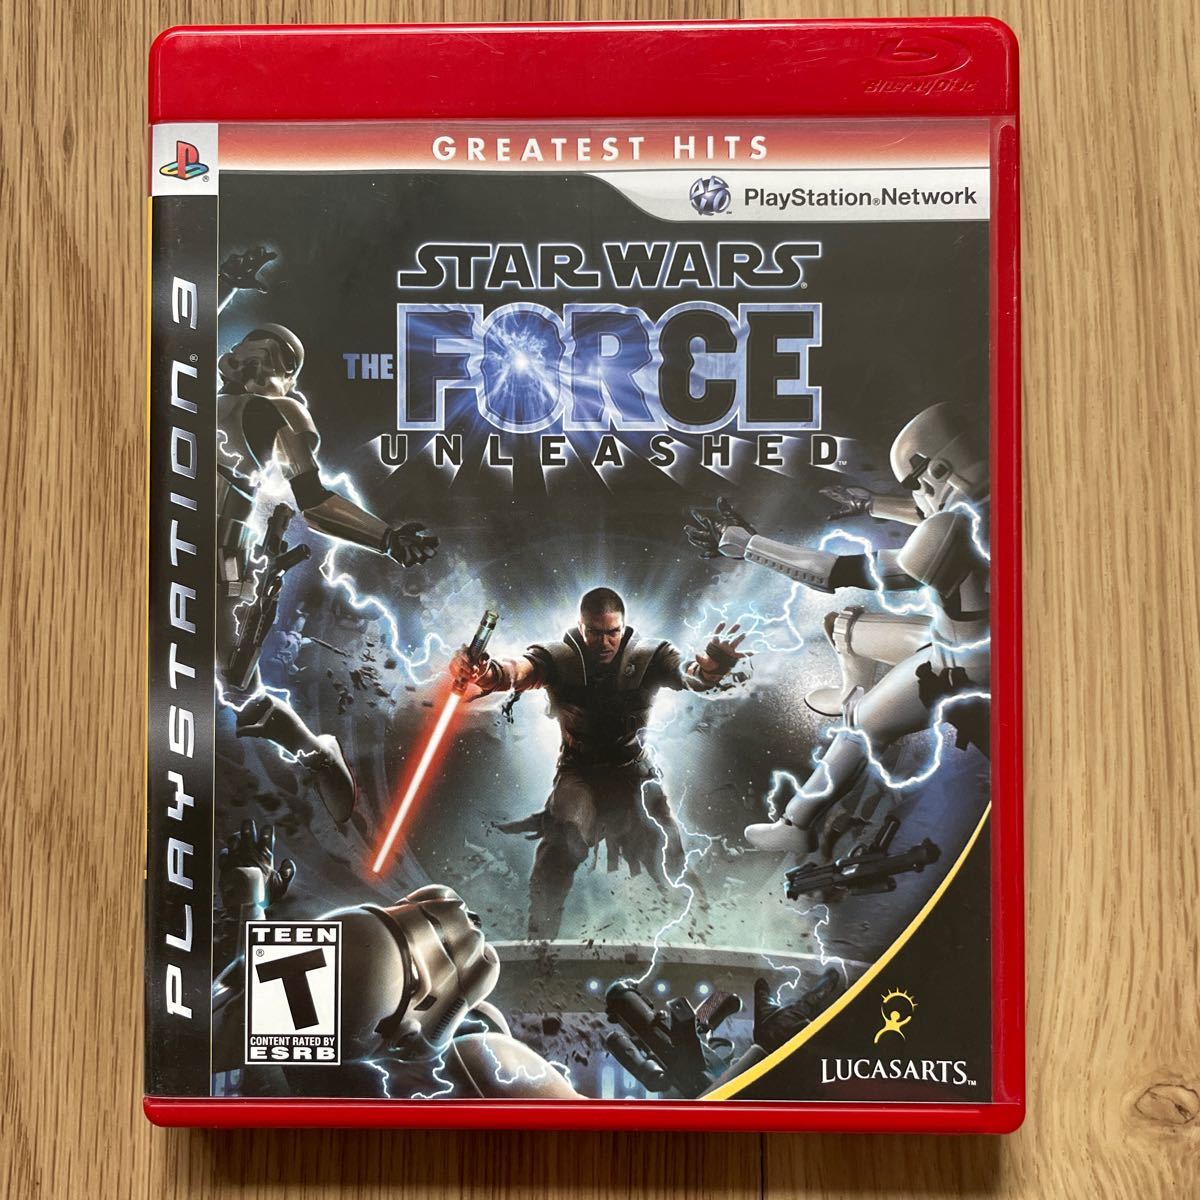 Starwars The Force Unleashed 輸入版 - PS3輸入品